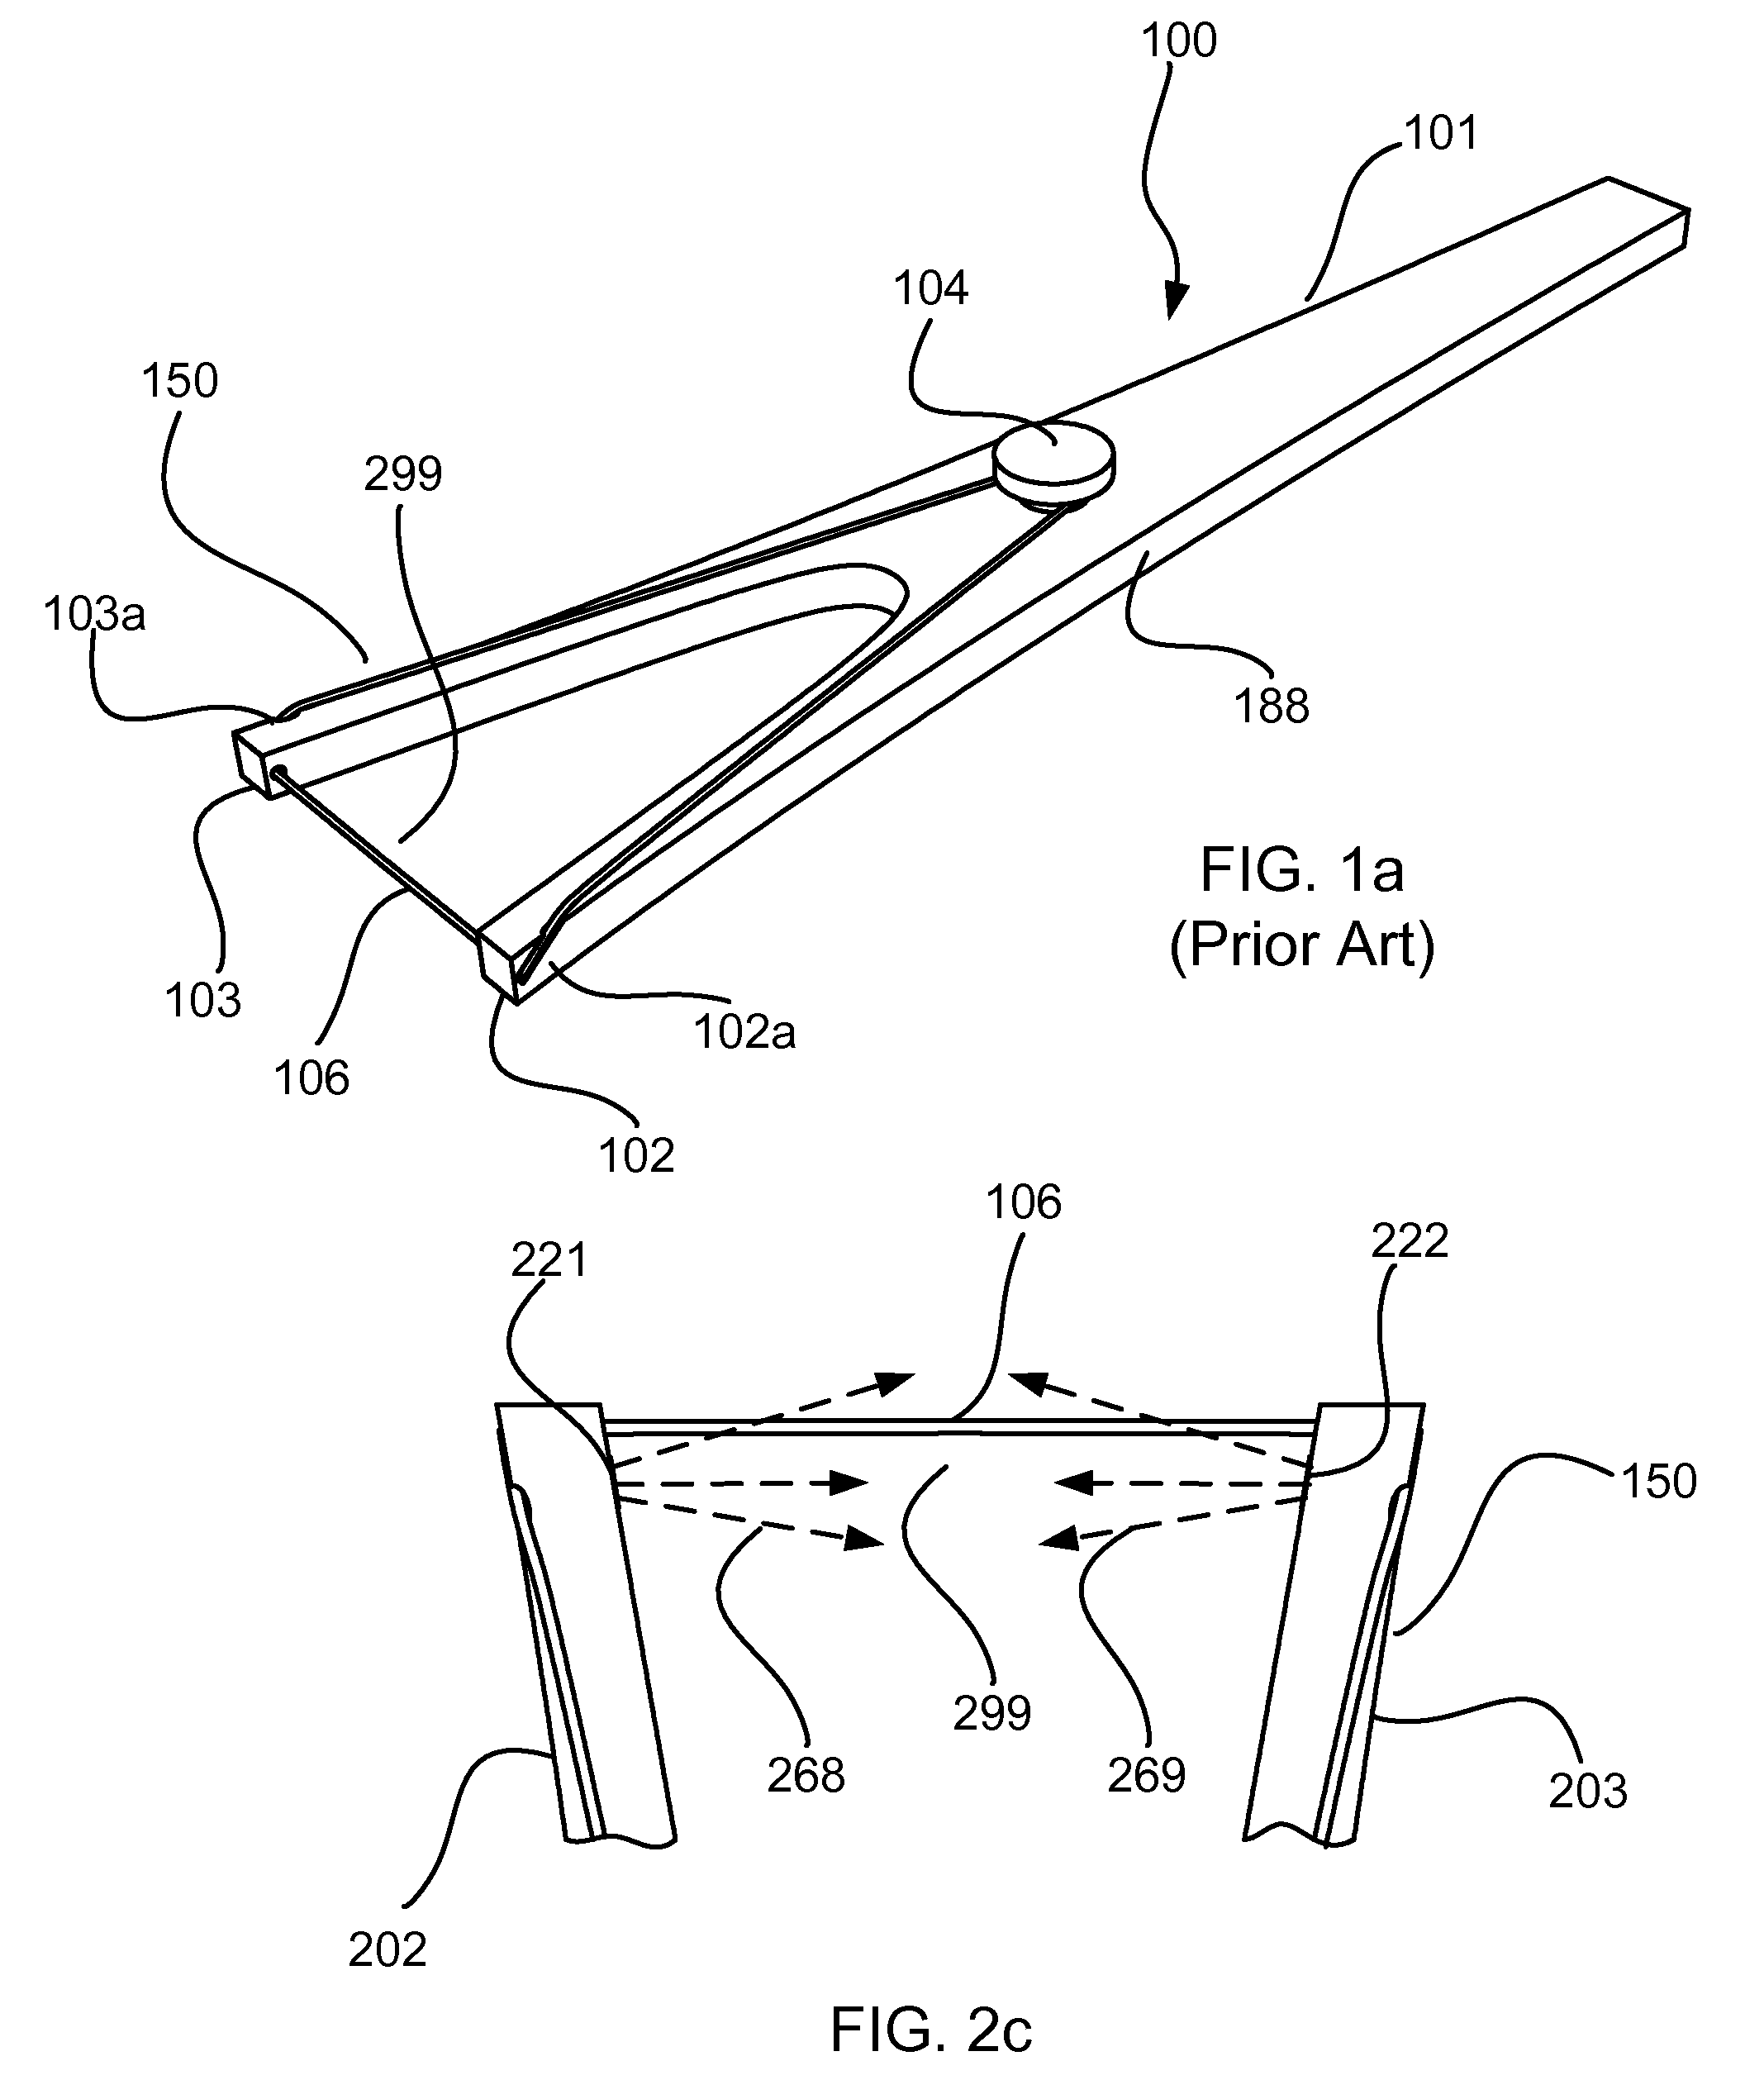 Dental Device Comprising a Light Guide and a Light Source